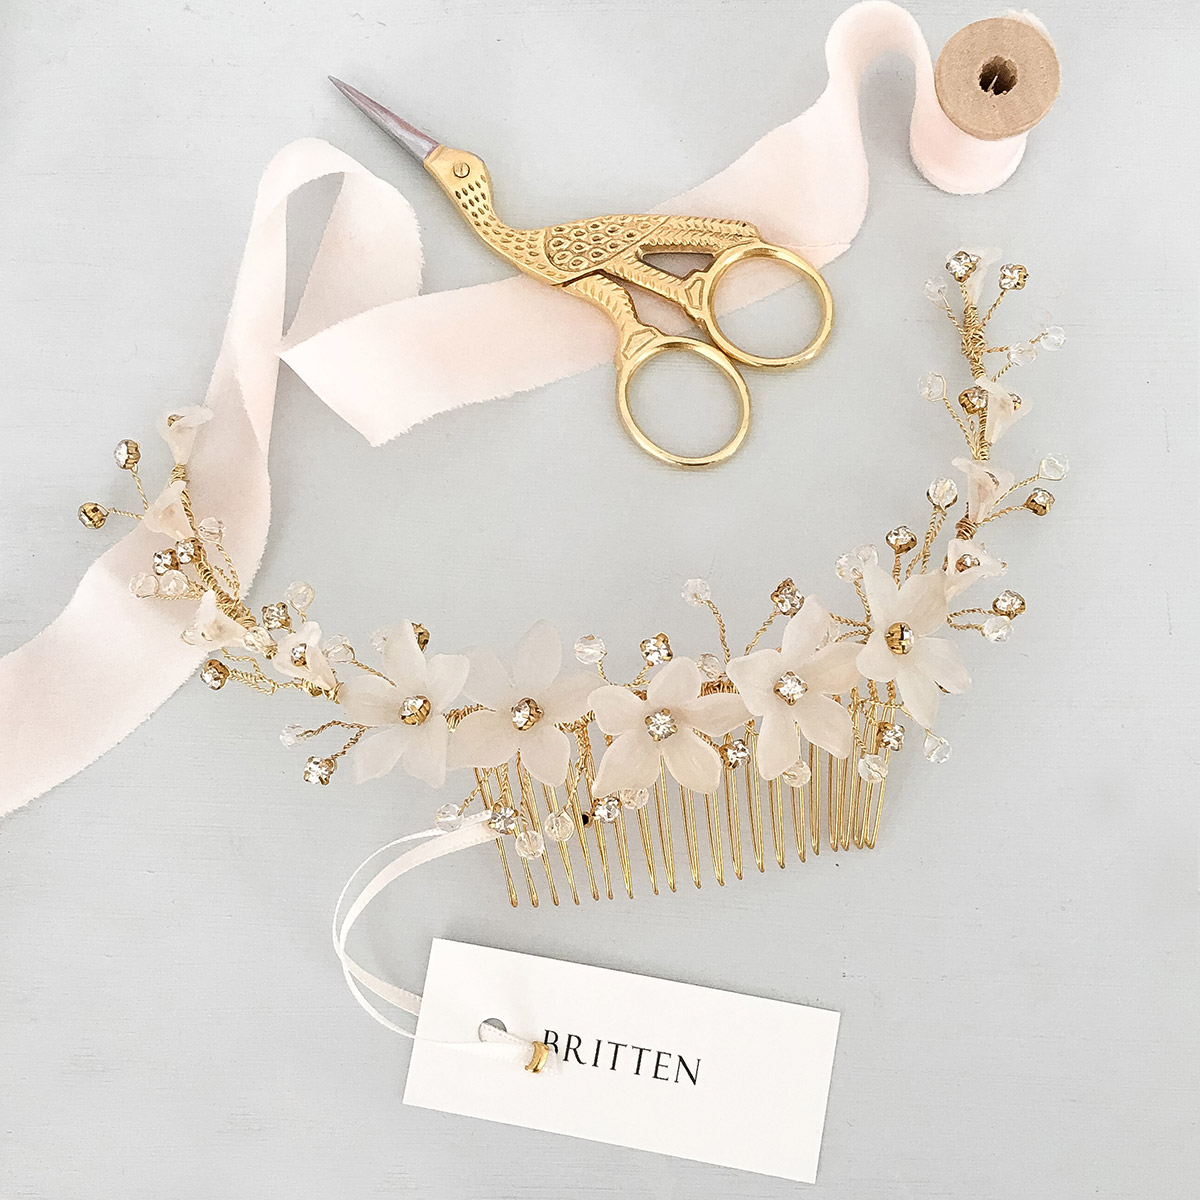 Finely handcrafted wedding accessories from Britten Weddings